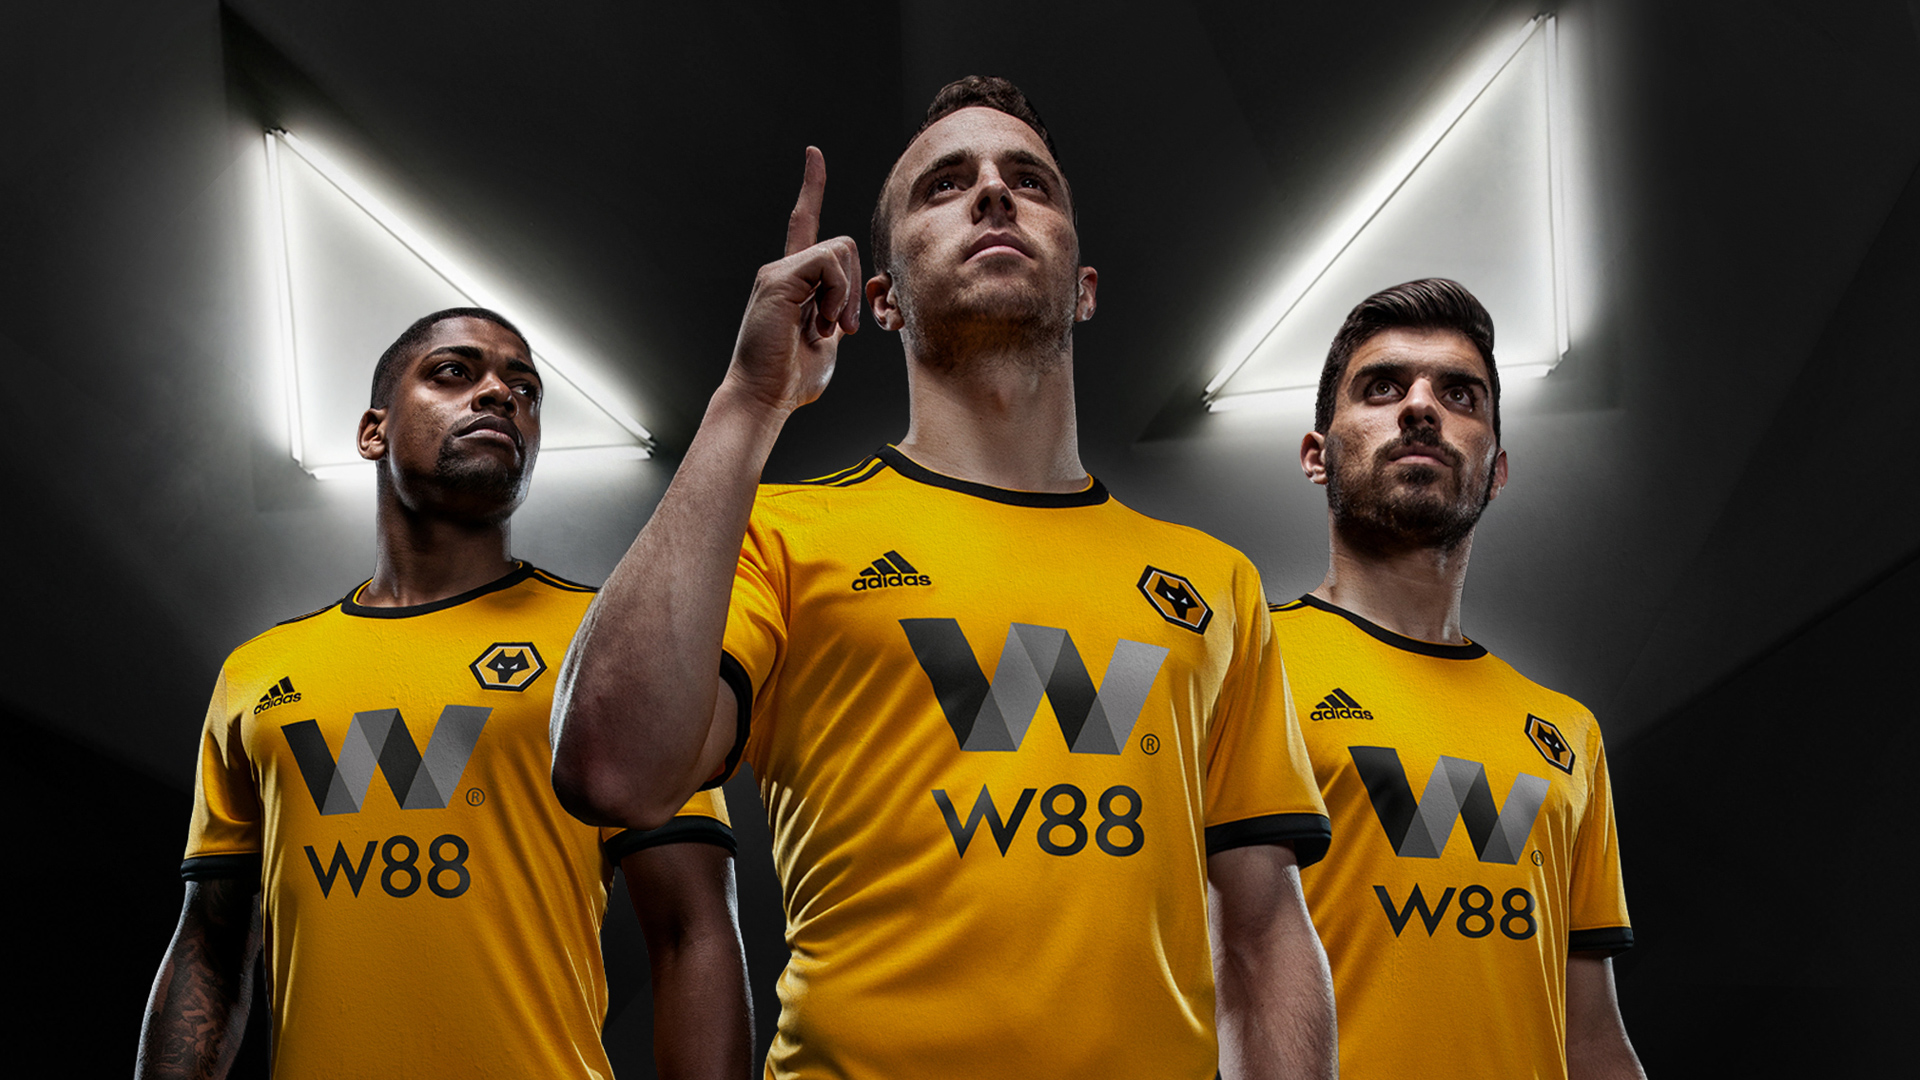 redesign for wolves - england - New visual identity for Wolverhampton Wanderers